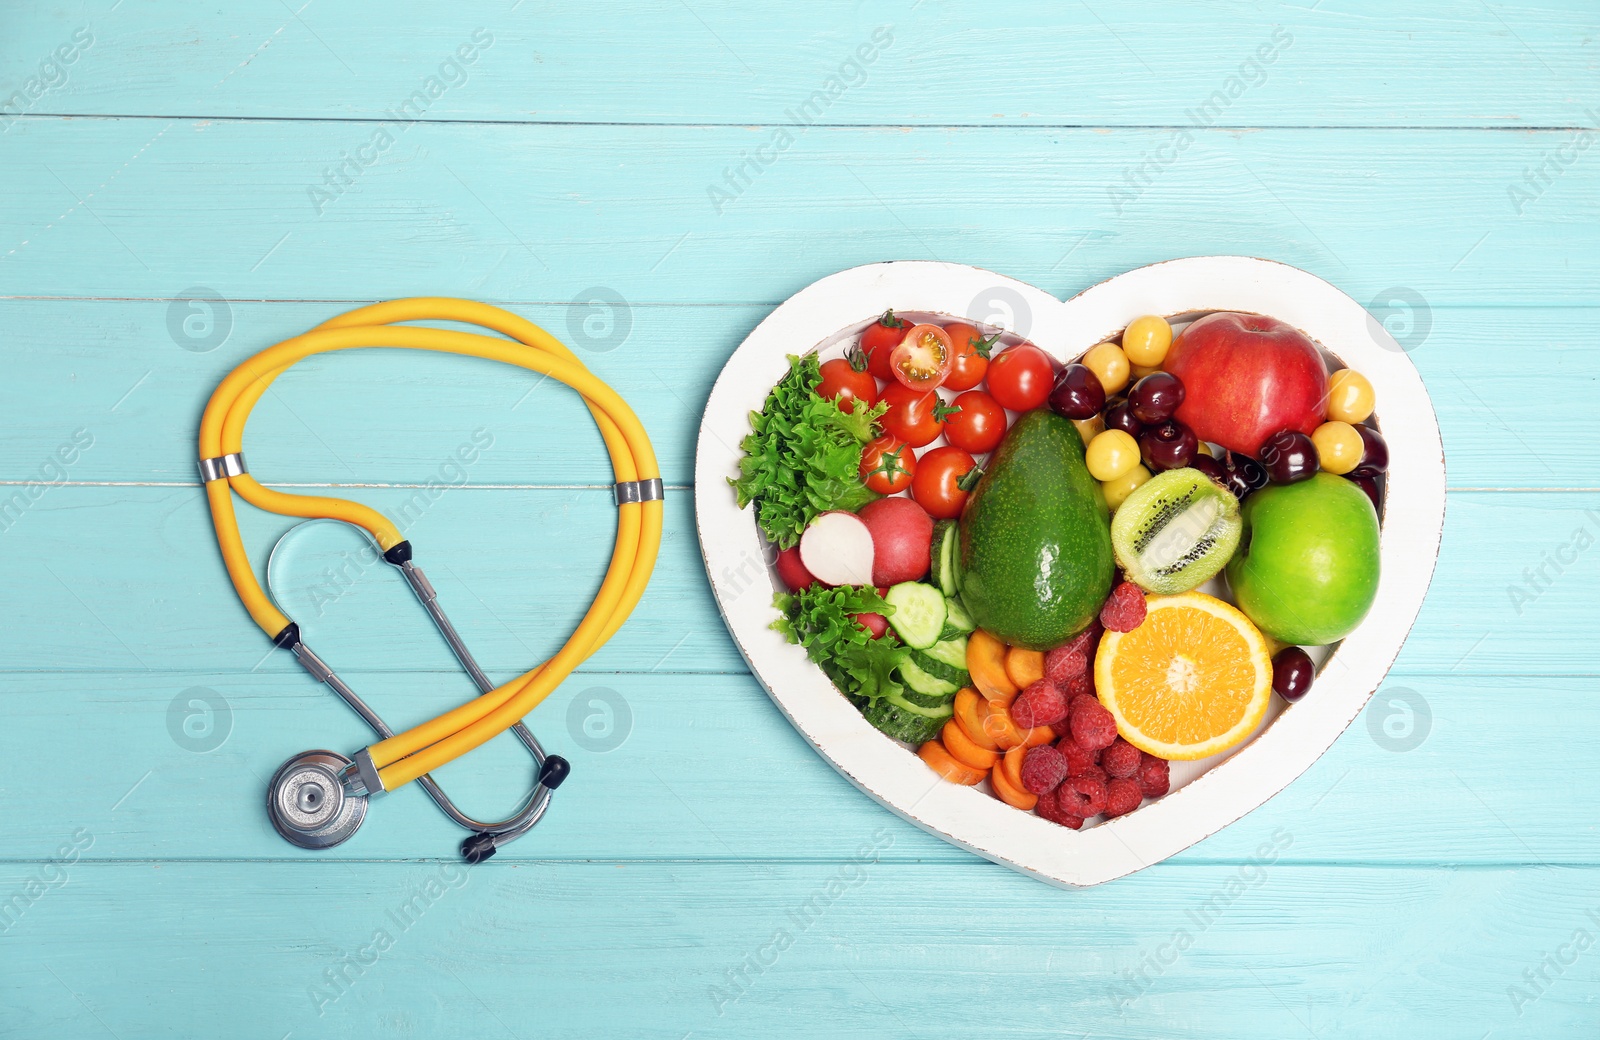 Photo of Heart shaped plate with fresh fruits, vegetables and stethoscope on wooden background, top view. Cardiac diet